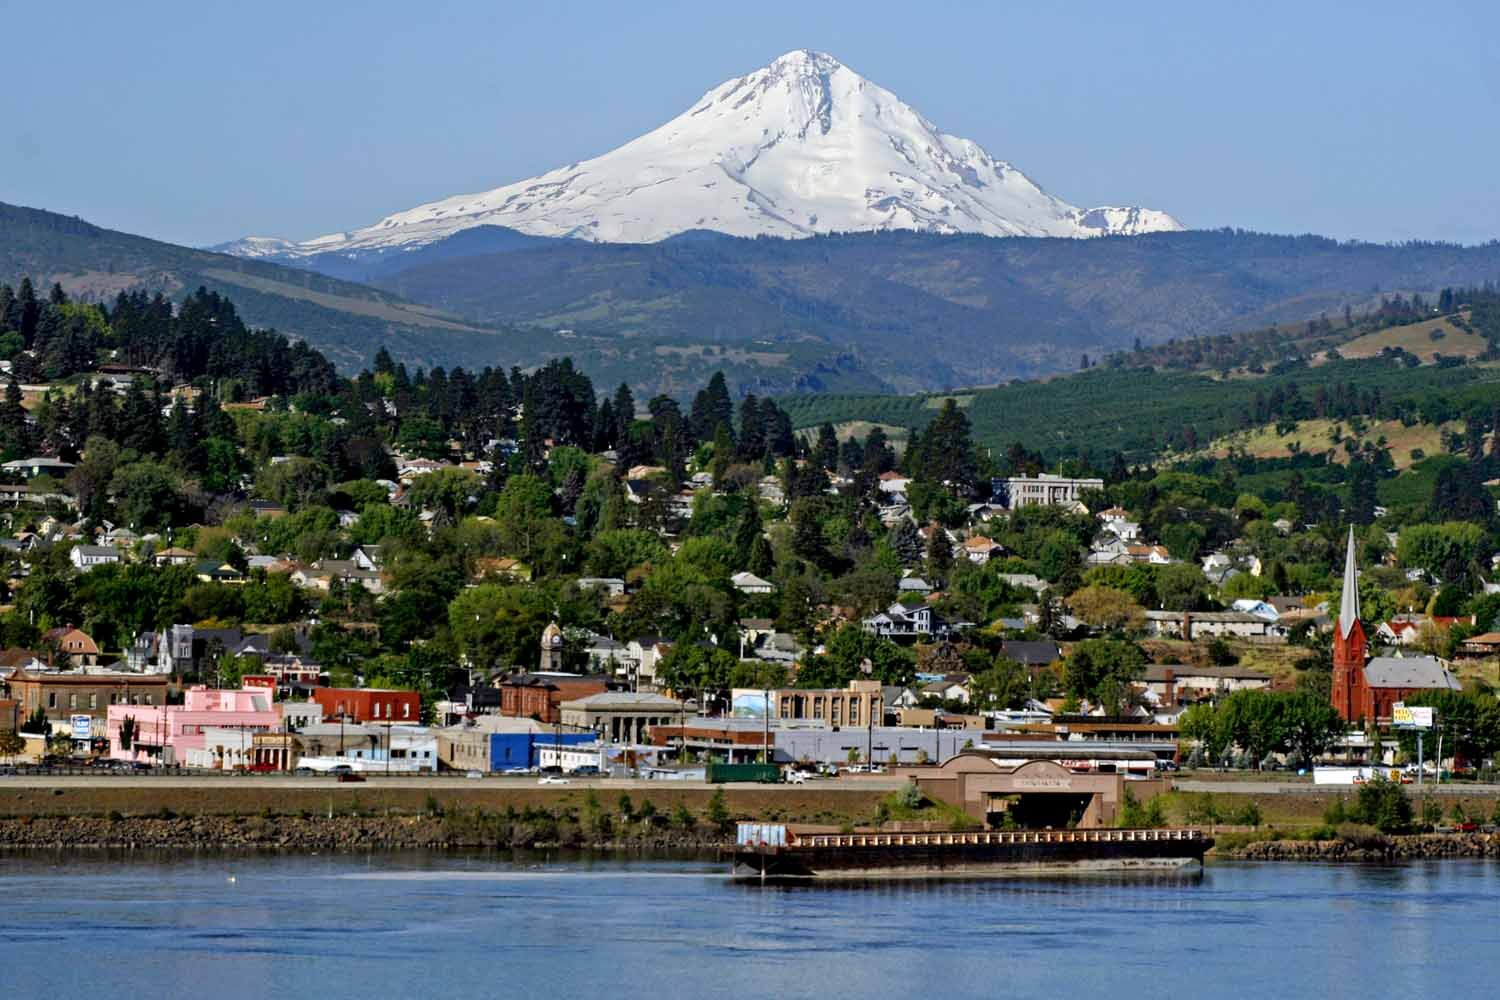 WascoCounty_IconicImage_Mt-Hood-from-Dallesport_ImageCredit_The-Dalles-Chamber-of-Commerce.jpg